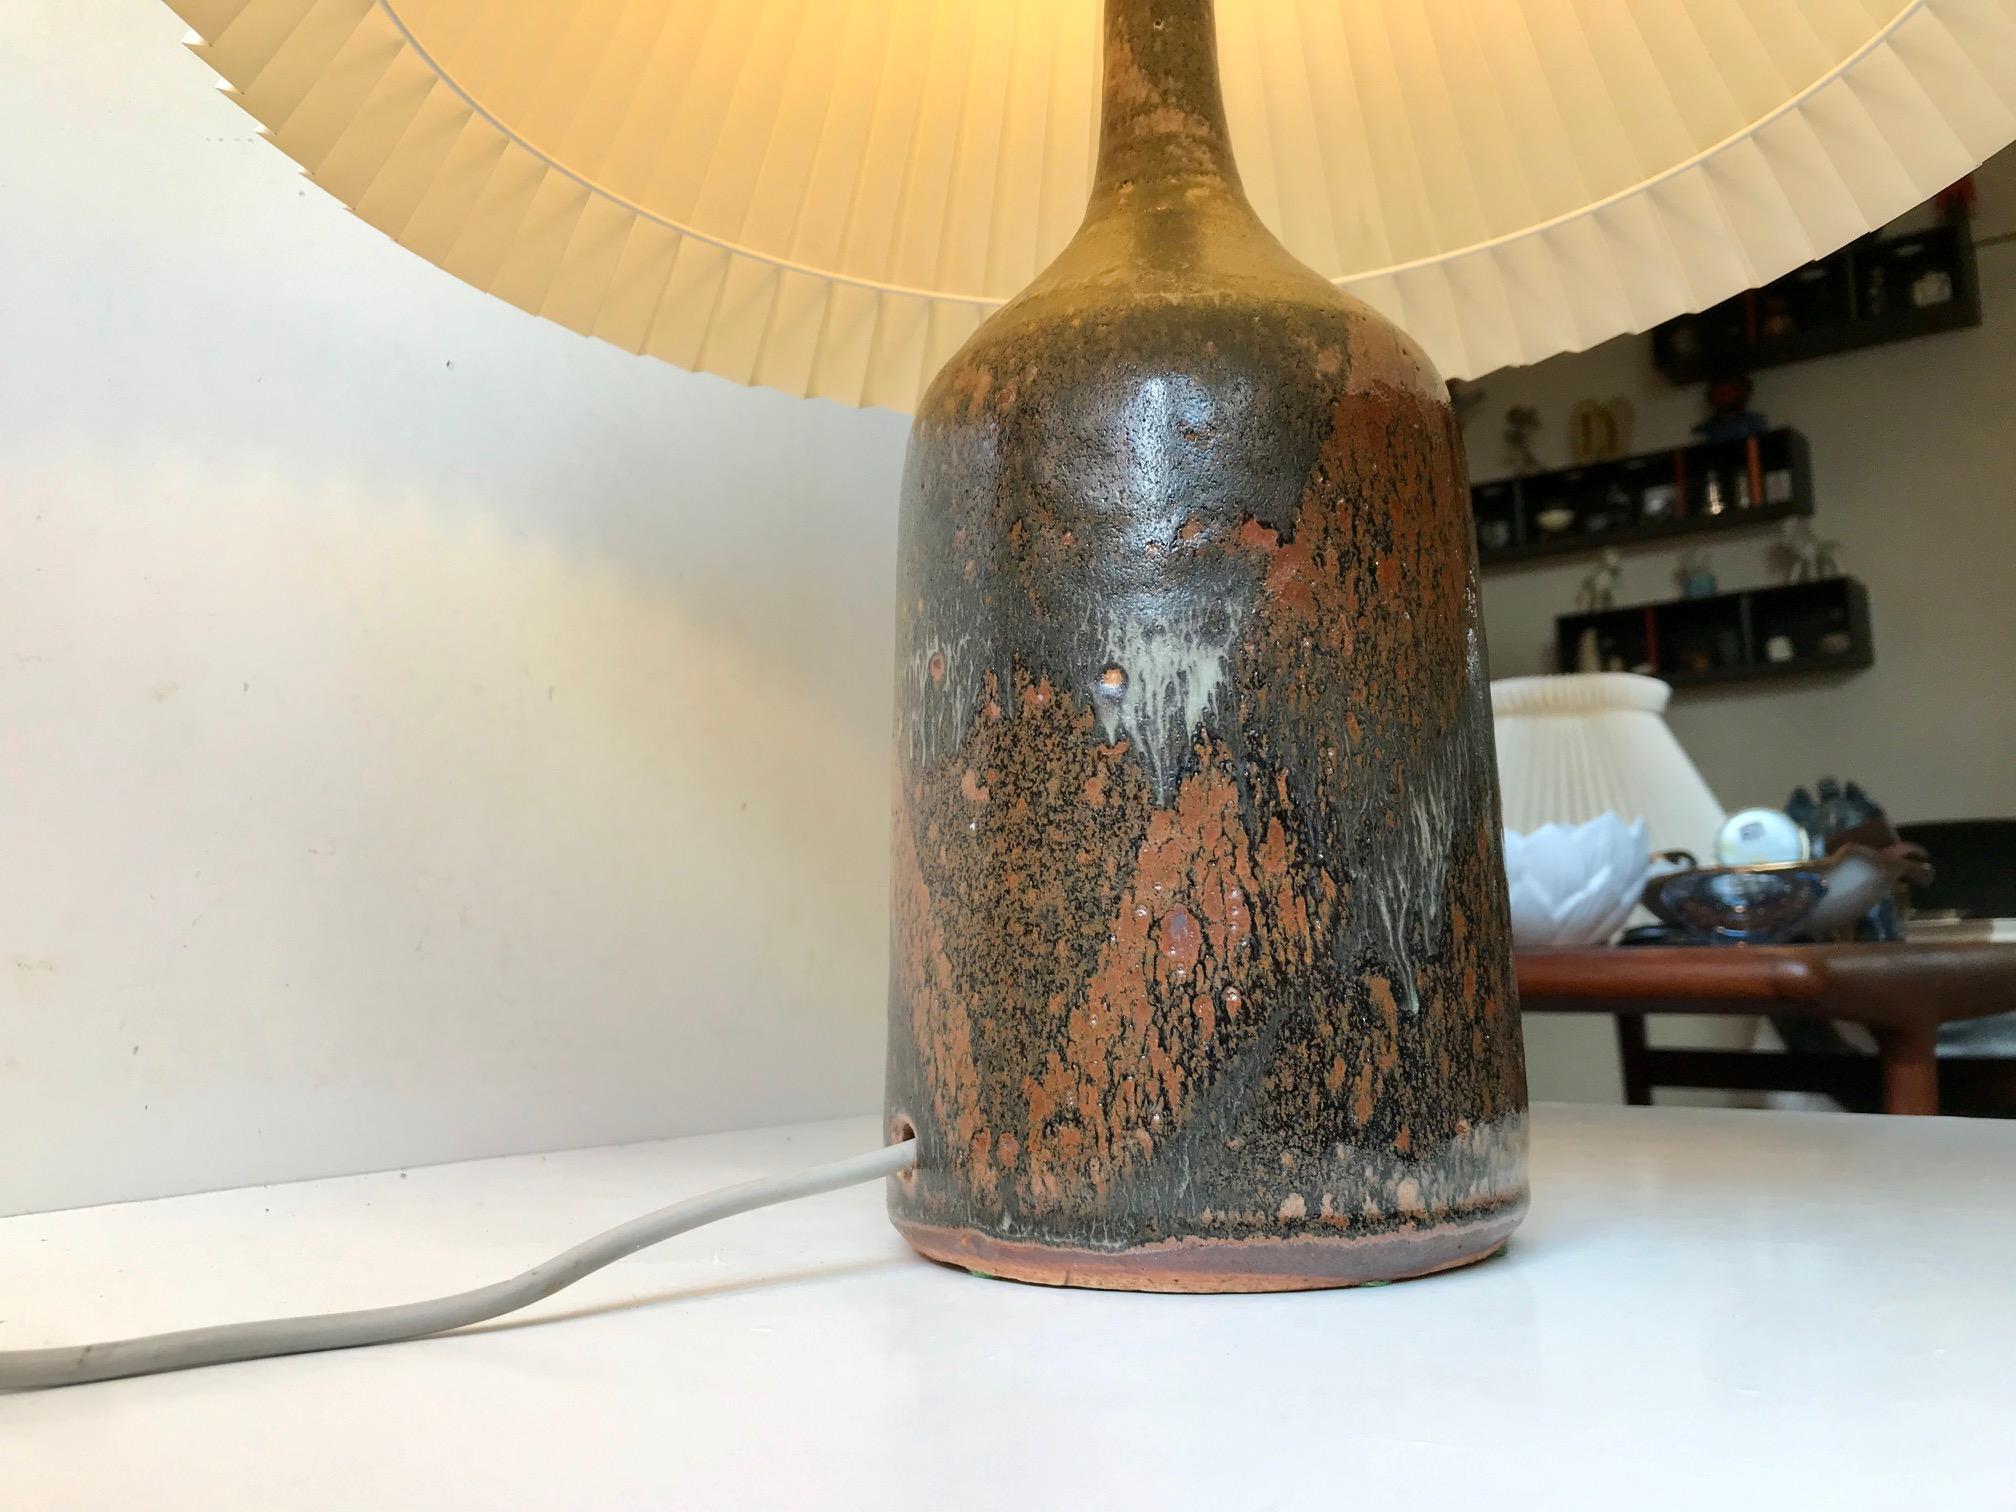 Monumental stoneware table lights with earthy iron-like polychrome glazes. Designed by Danish ceramist Conny Walther during the early 1970s. Its probably from the ceramist own collection hence the rather indistinguishable markings. A remarkable